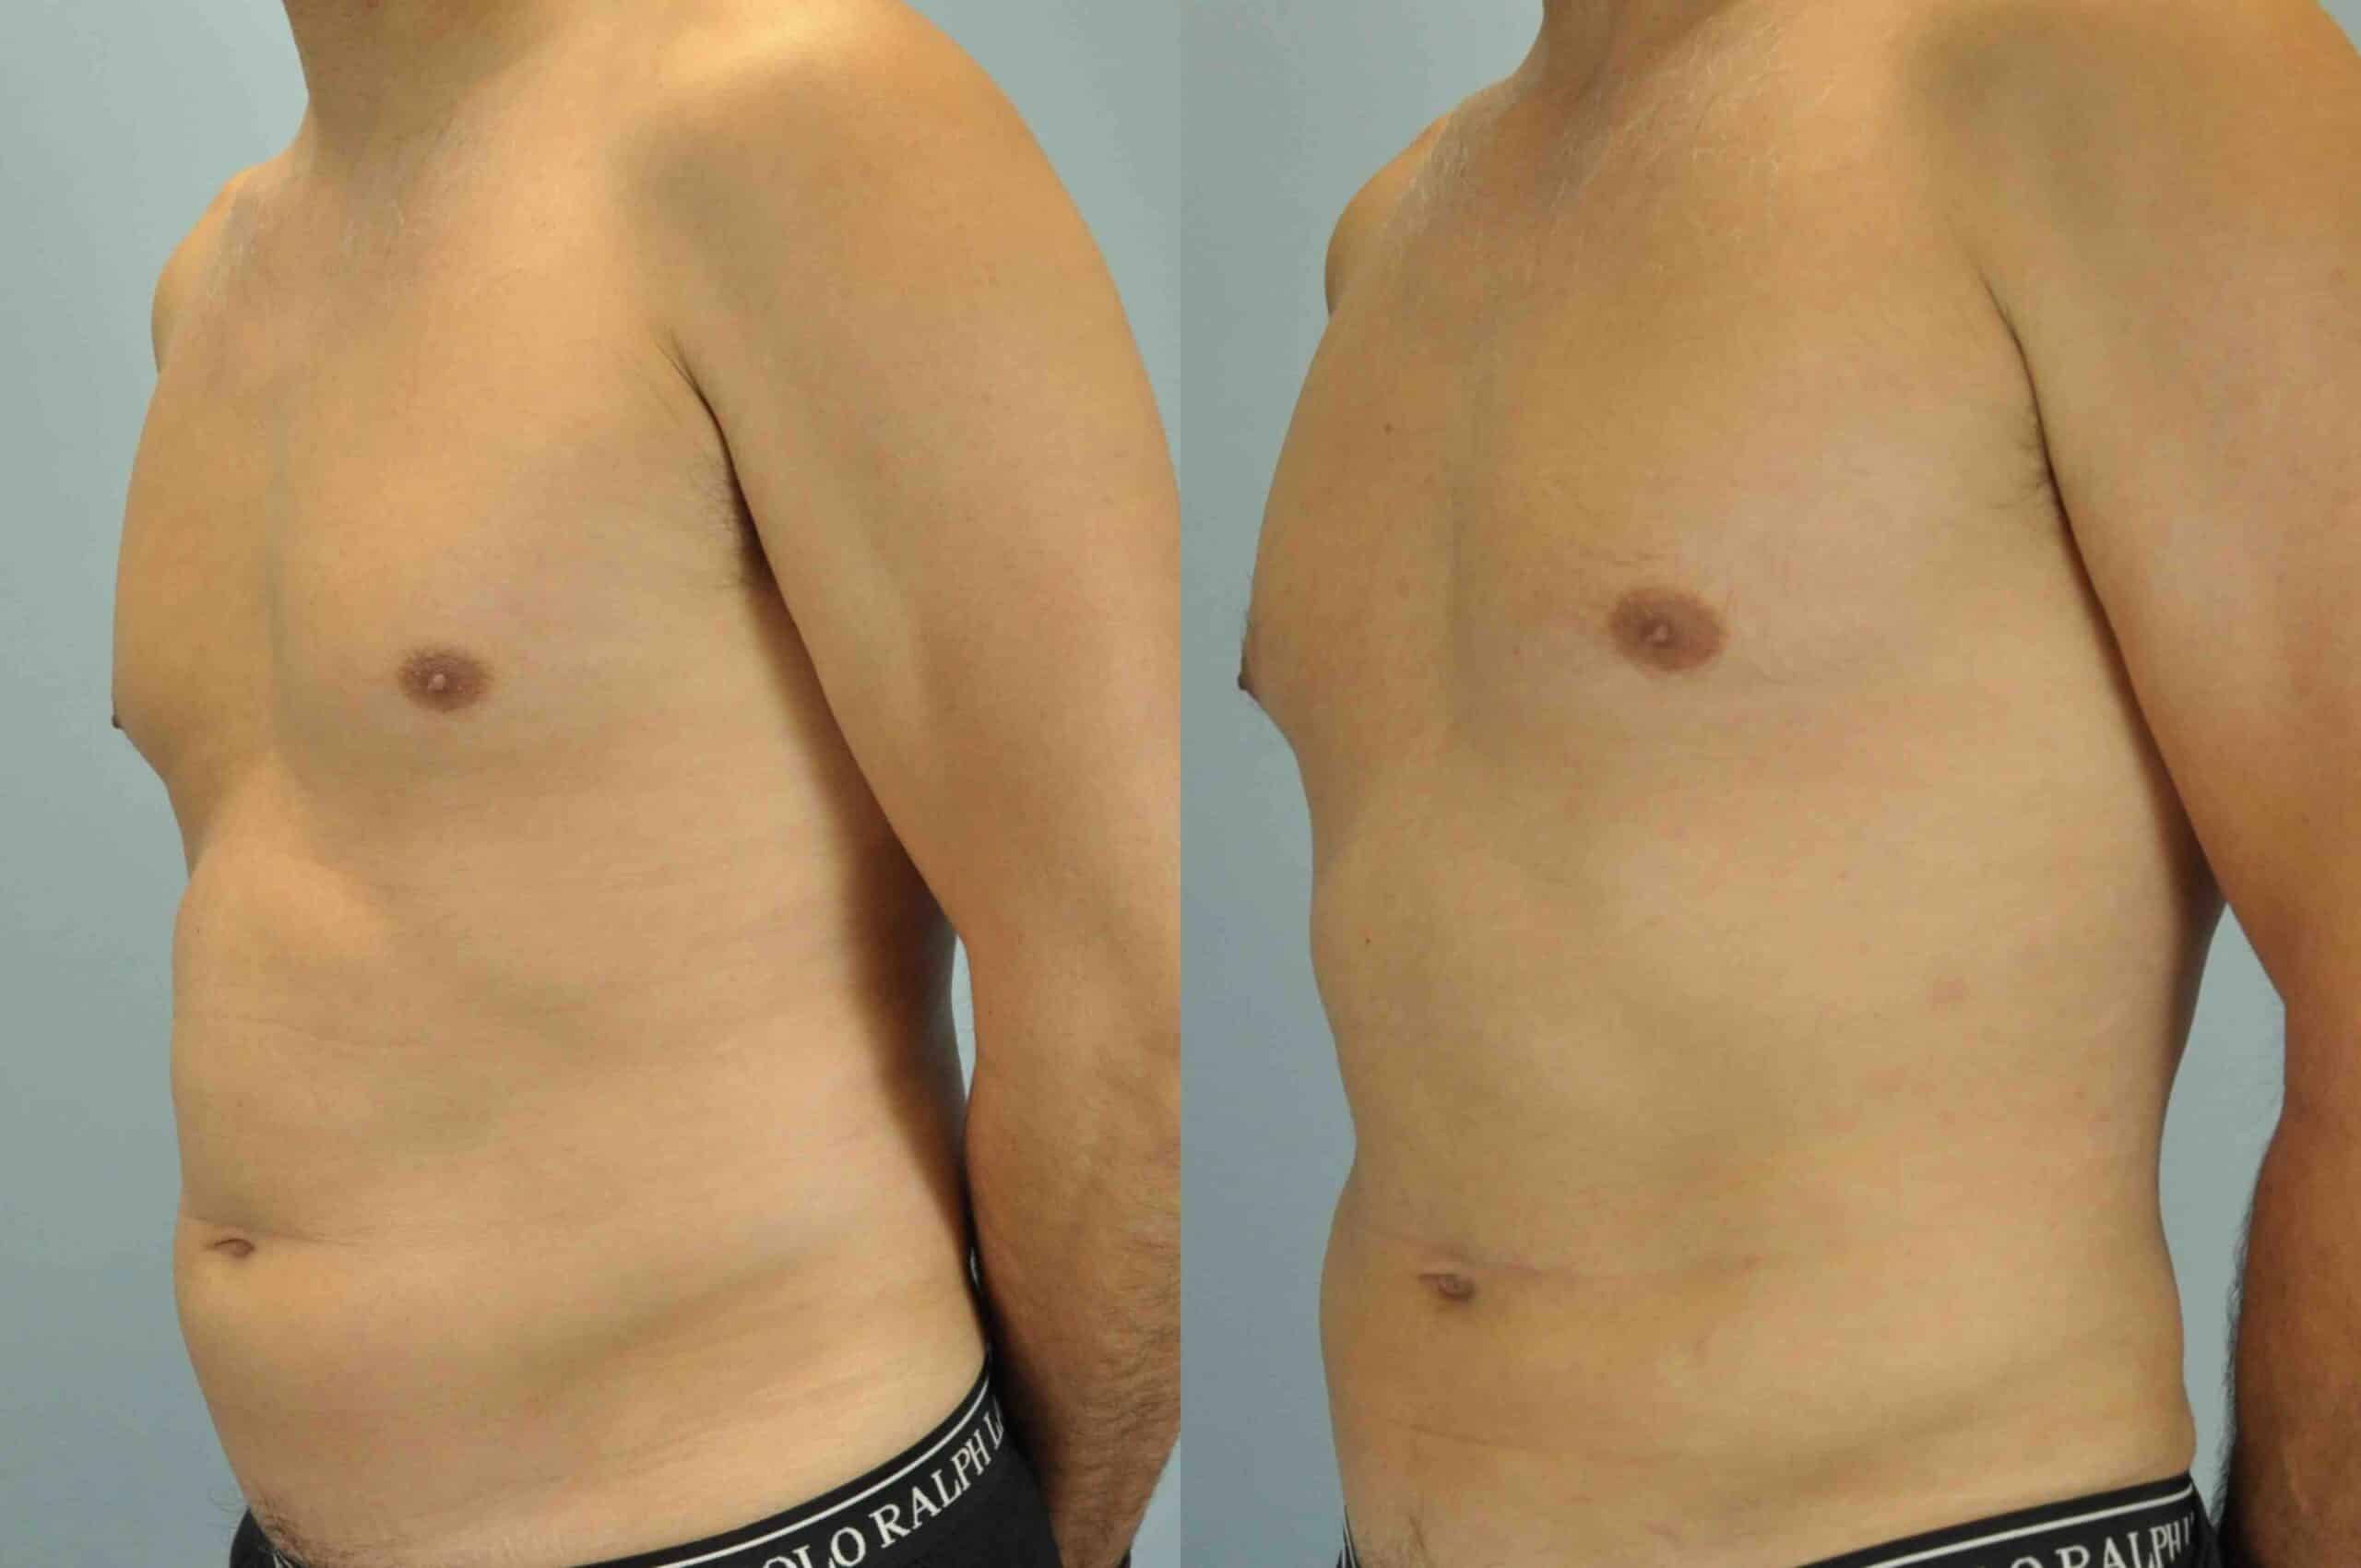 Before and after, patient 2 mo post op from VASER Abdomen and Flanks procedures performed by Dr. Paul Vanek